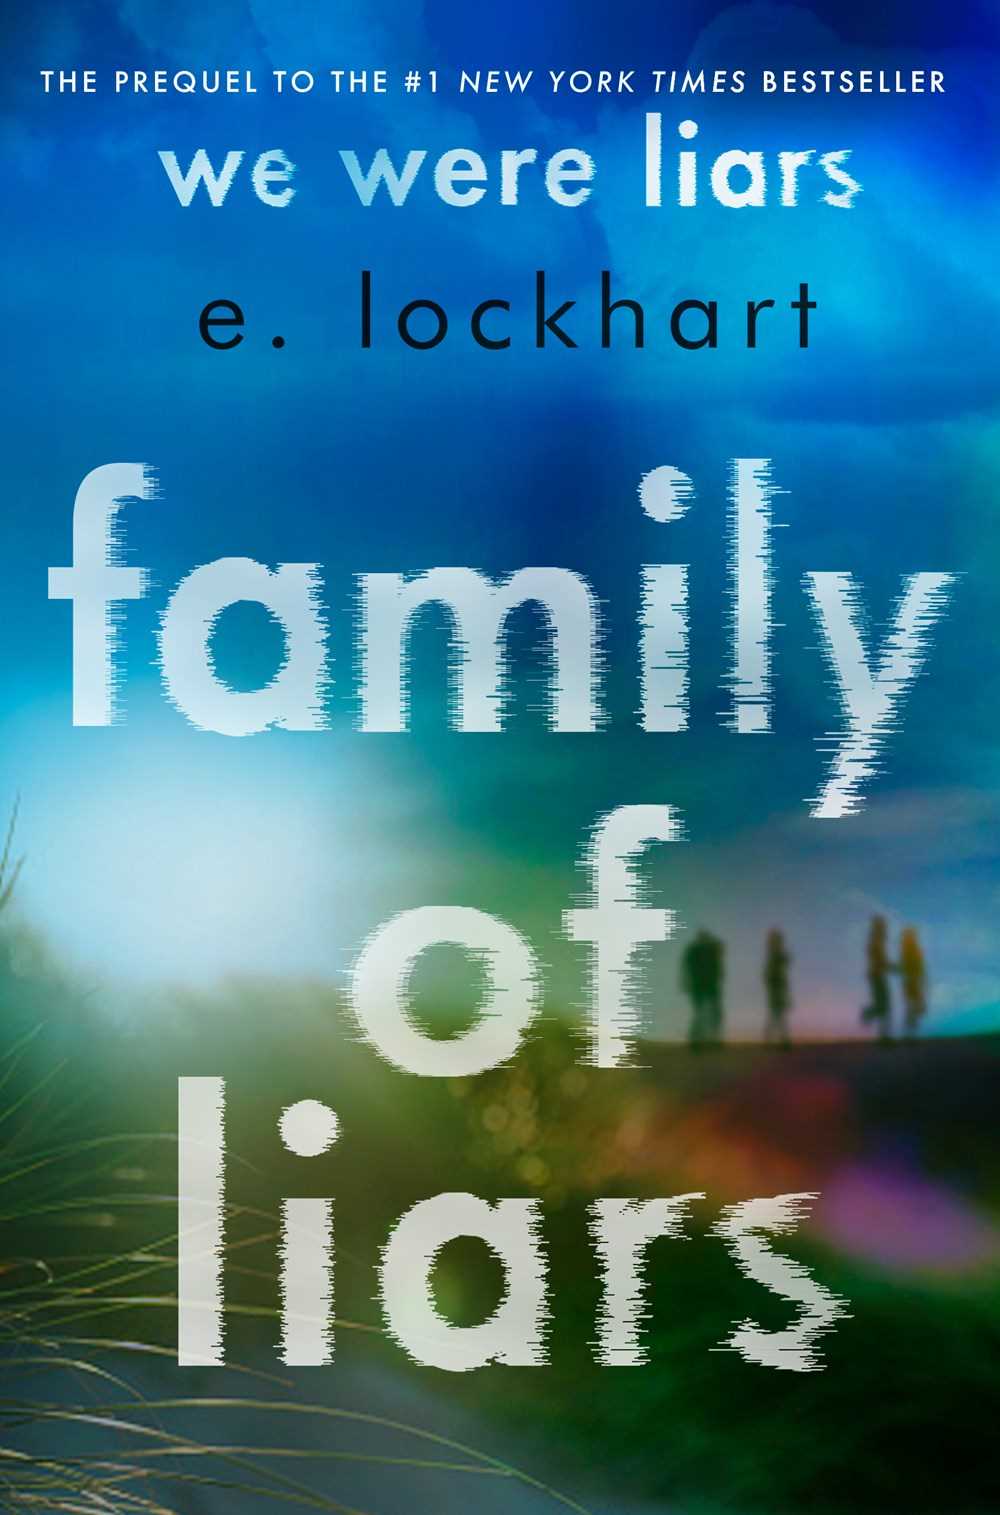 Family of Liars